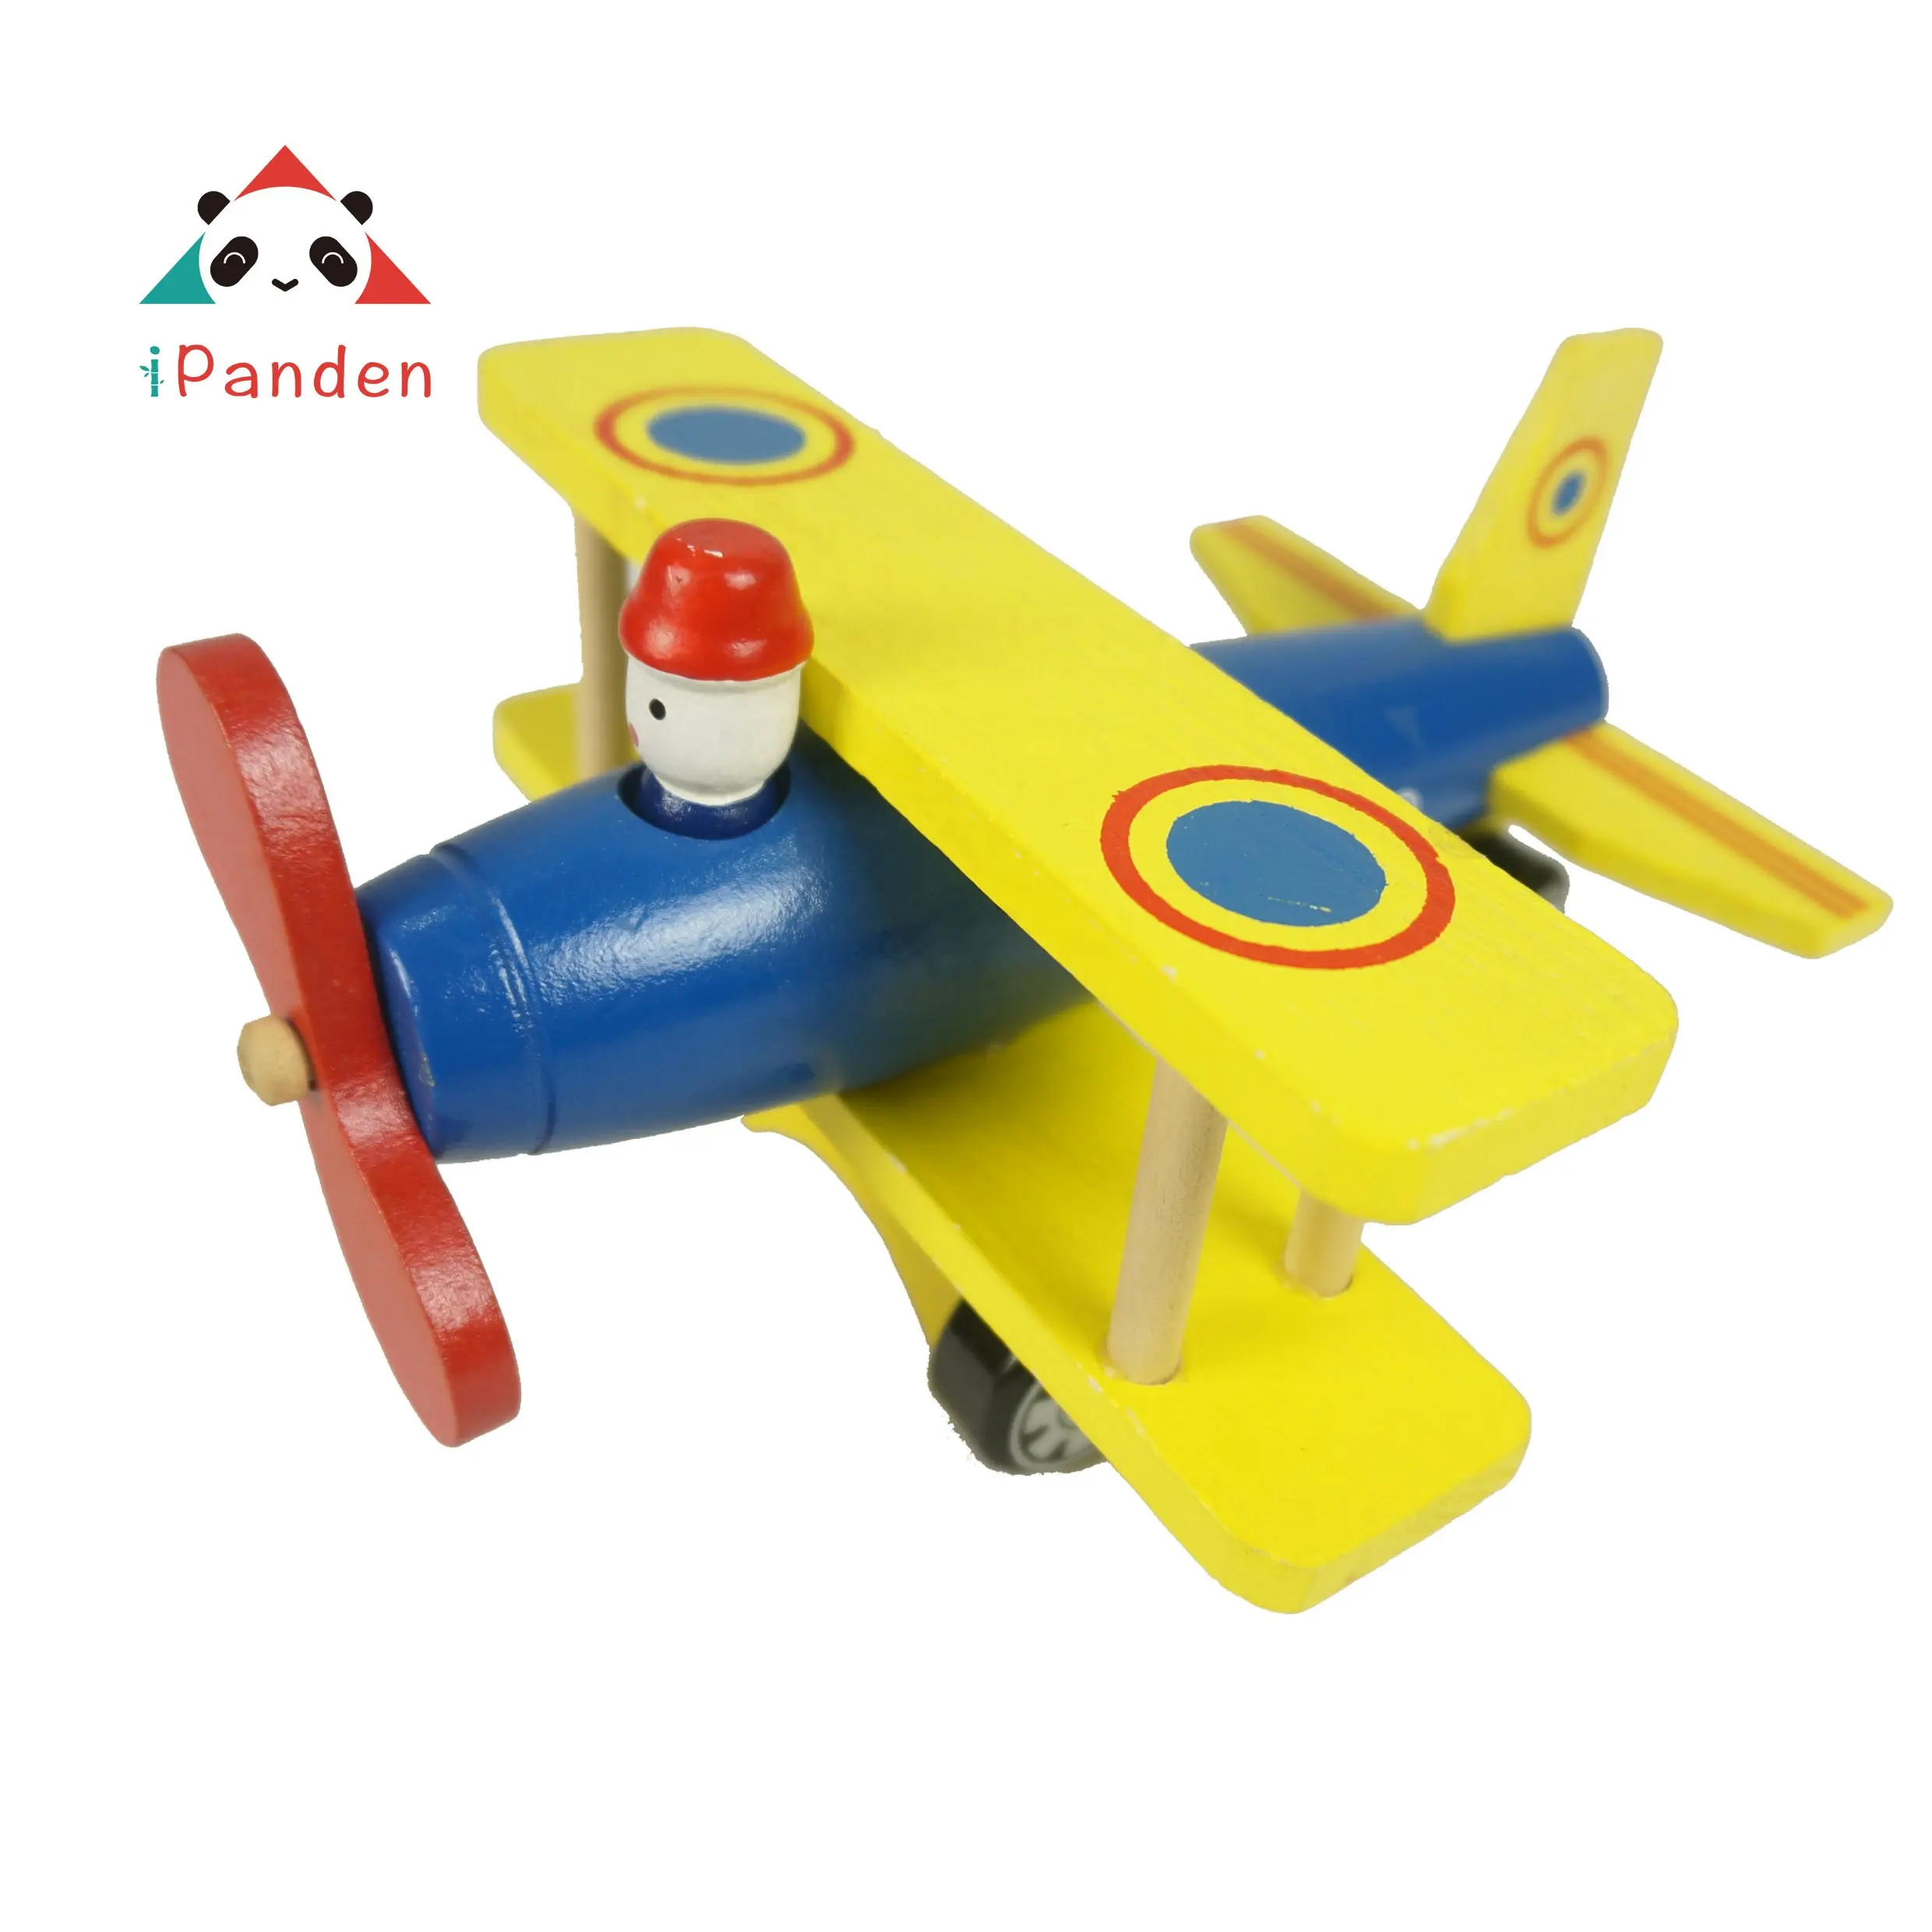 Airplane Model Toy Wooden Airplane Model Toy Cheap Wooden Traffic Toy For Kids